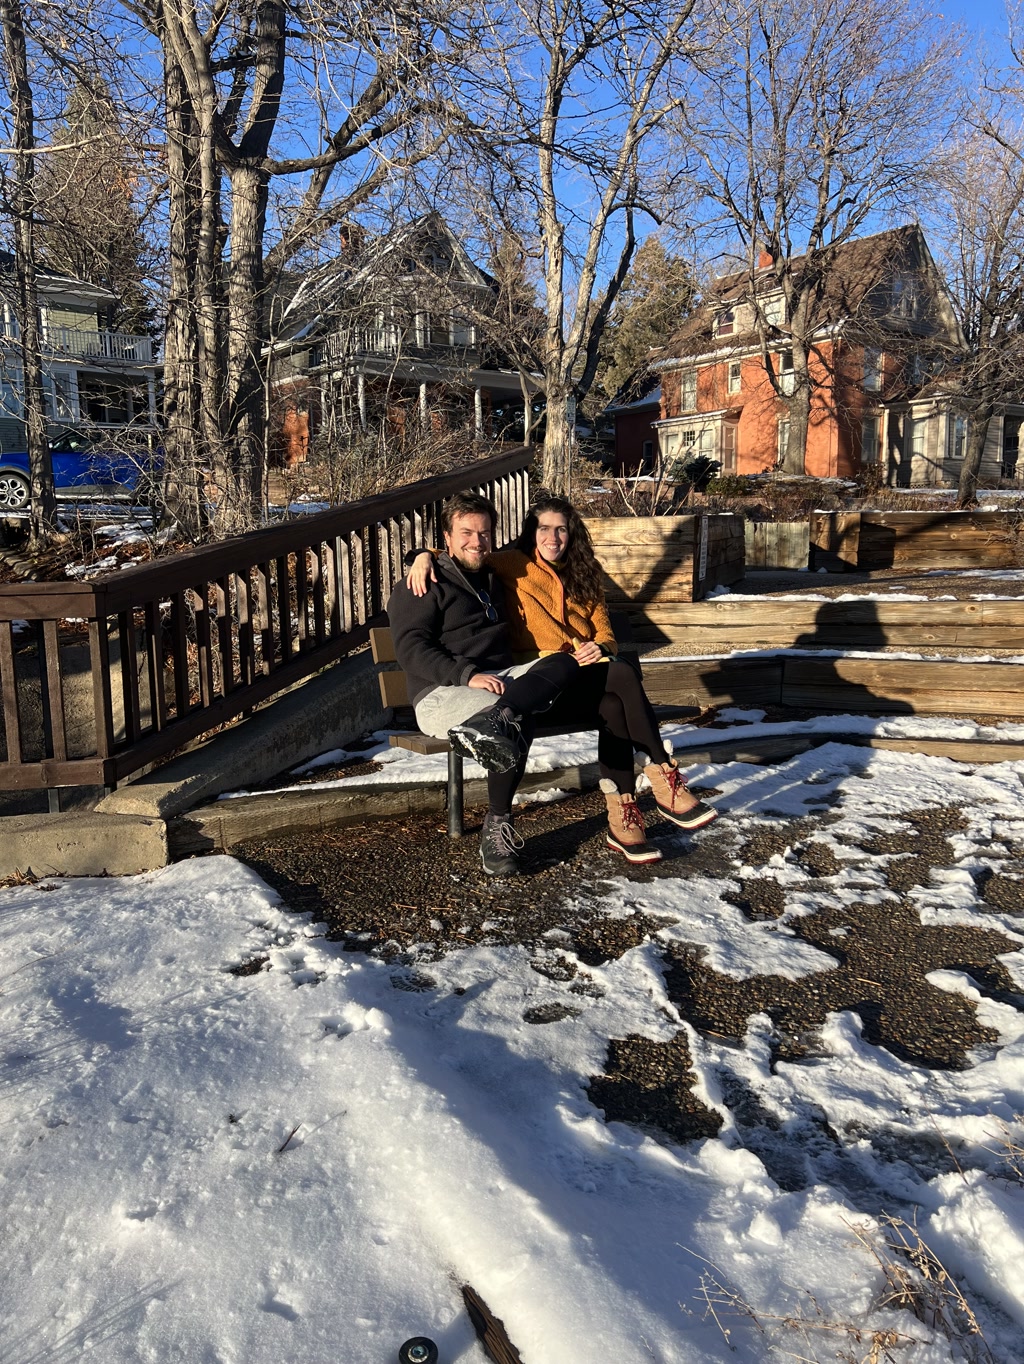 Two people are sitting on a wooden ledge flanked by bare trees, with residential buildings in the background. The ground and steps in the foreground are partially covered in snow, and there are clear patches where the snow has melted. The individuals appear to be enjoying a sunny day despite the cool surroundings suggested by their winter attire. The leaves on the trees are gone, indicating that it is either winter or late autumn. The male has casual clothing with a prominent watch on his left wrist and hands clasped, while the female is wearing a bright mustard-colored sweater, black leggings, and distinctive red boots with a fur trim. Both are smiling and seem to be in relaxed, cheerful spirits.